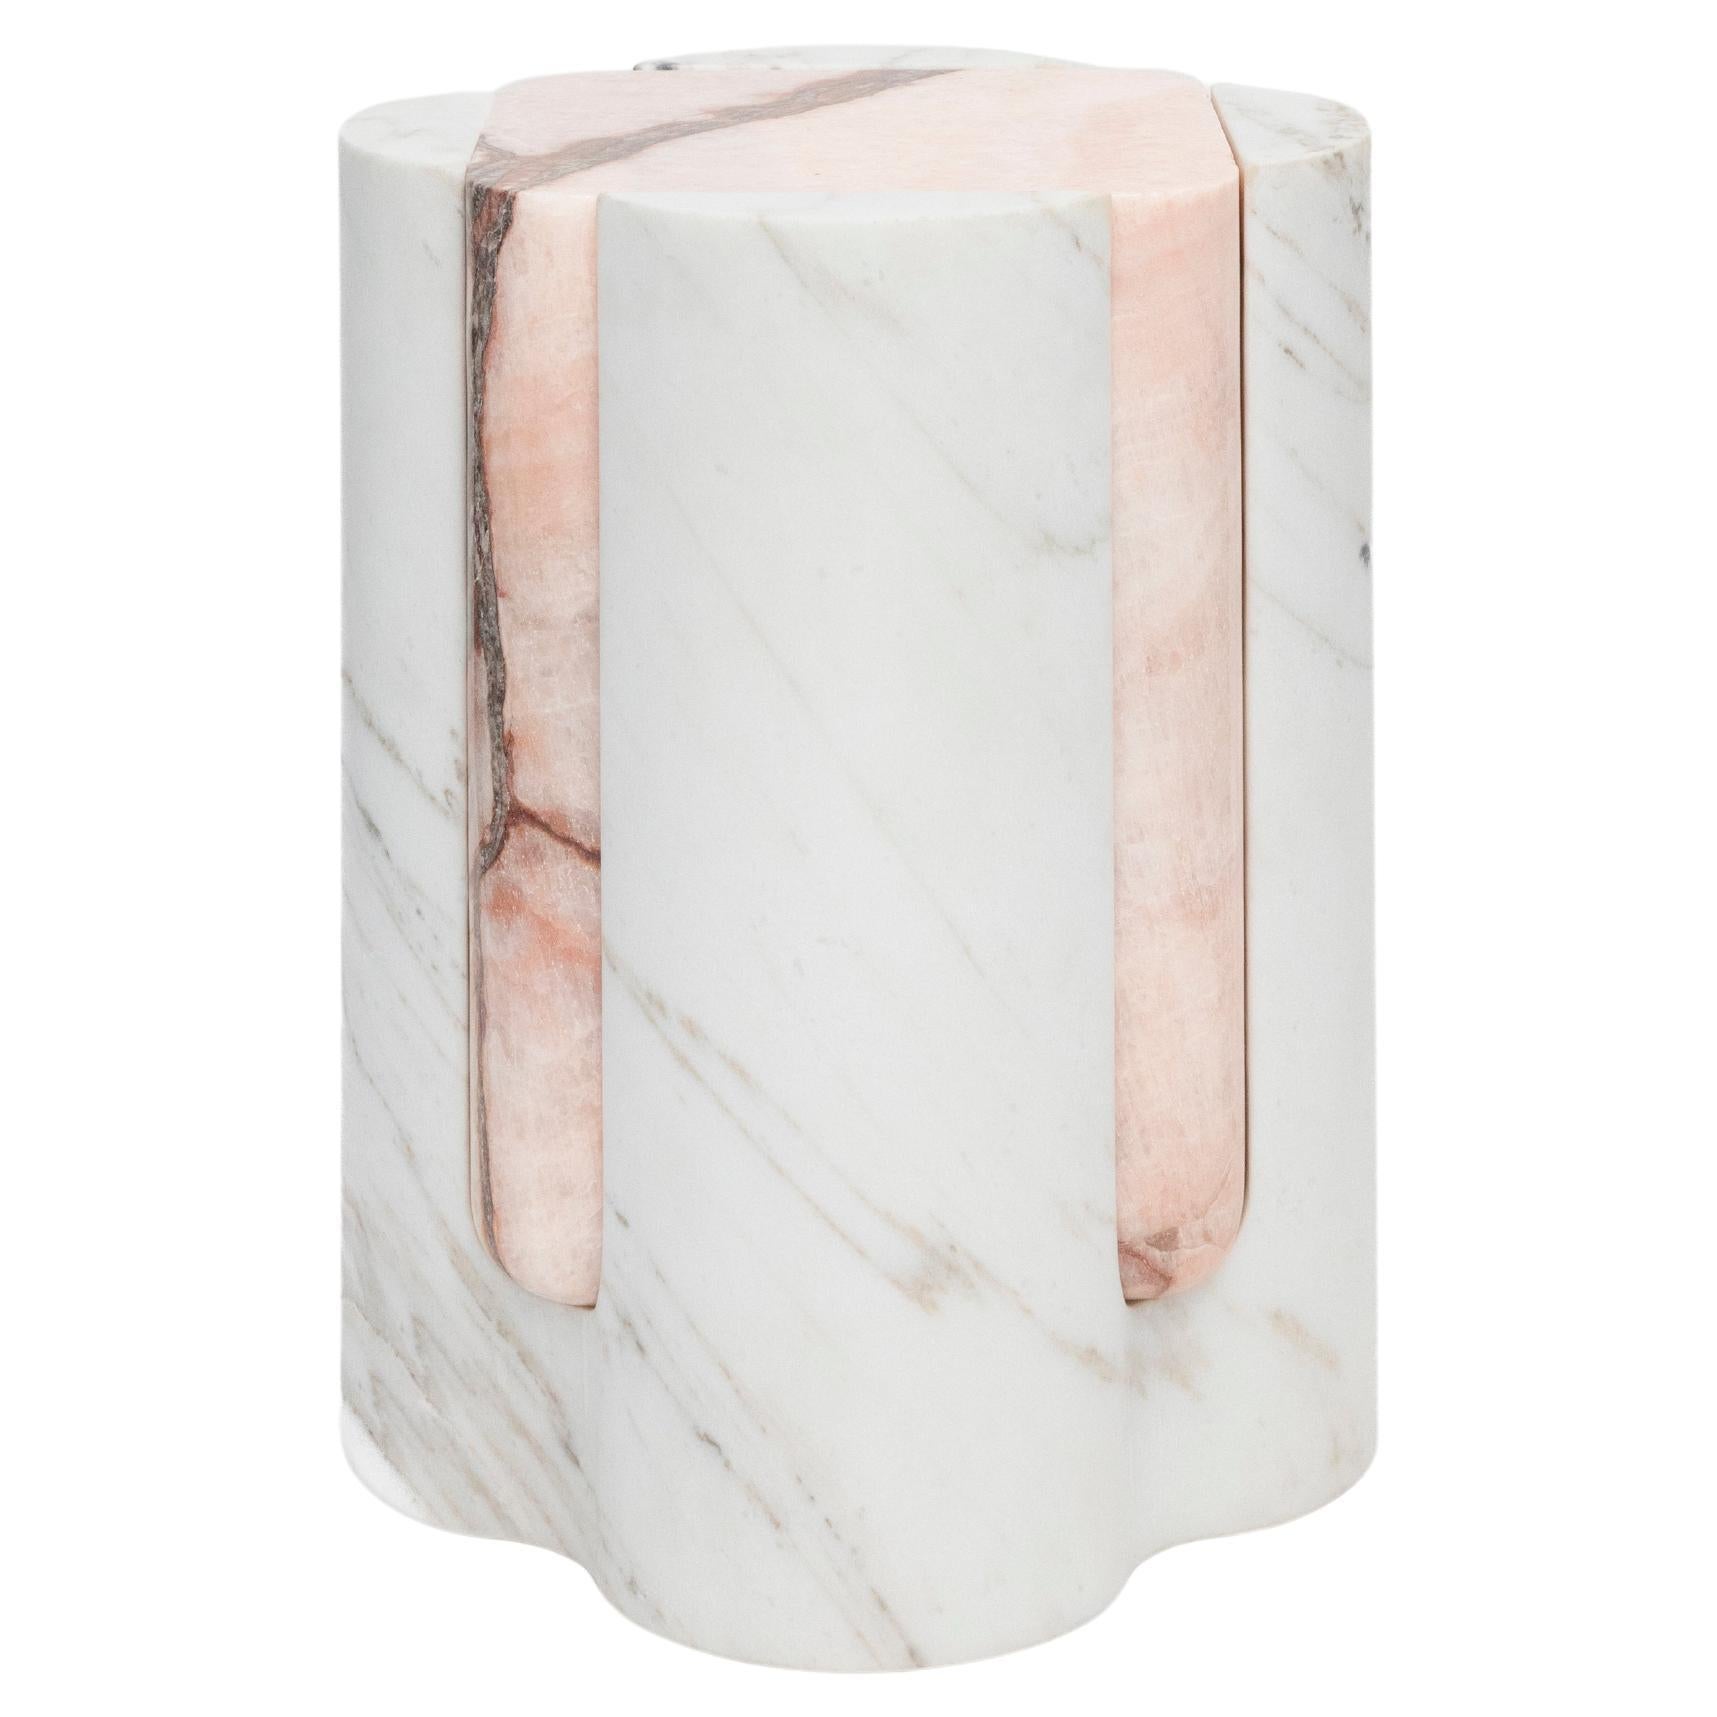 Volcanic Shades of marble II - Sten Studio - Golden calacatta and pink onyx For Sale